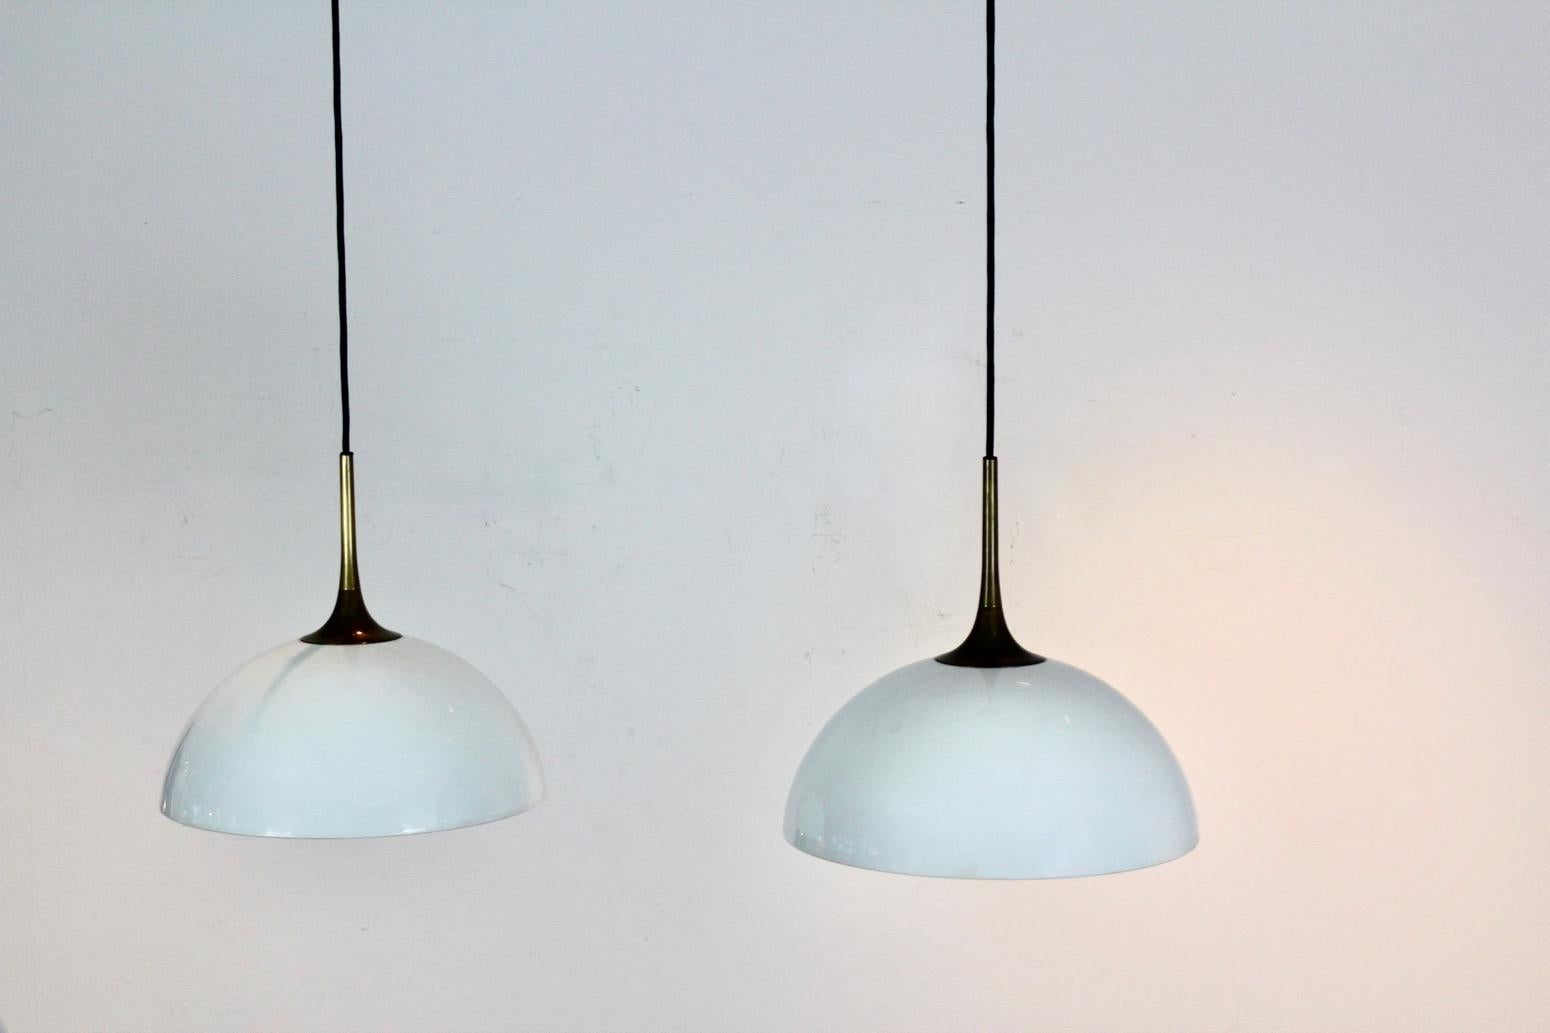 Elegant Pair of Brass and White-Opal Glass Pendant Lights by Florian Schulz For Sale 3